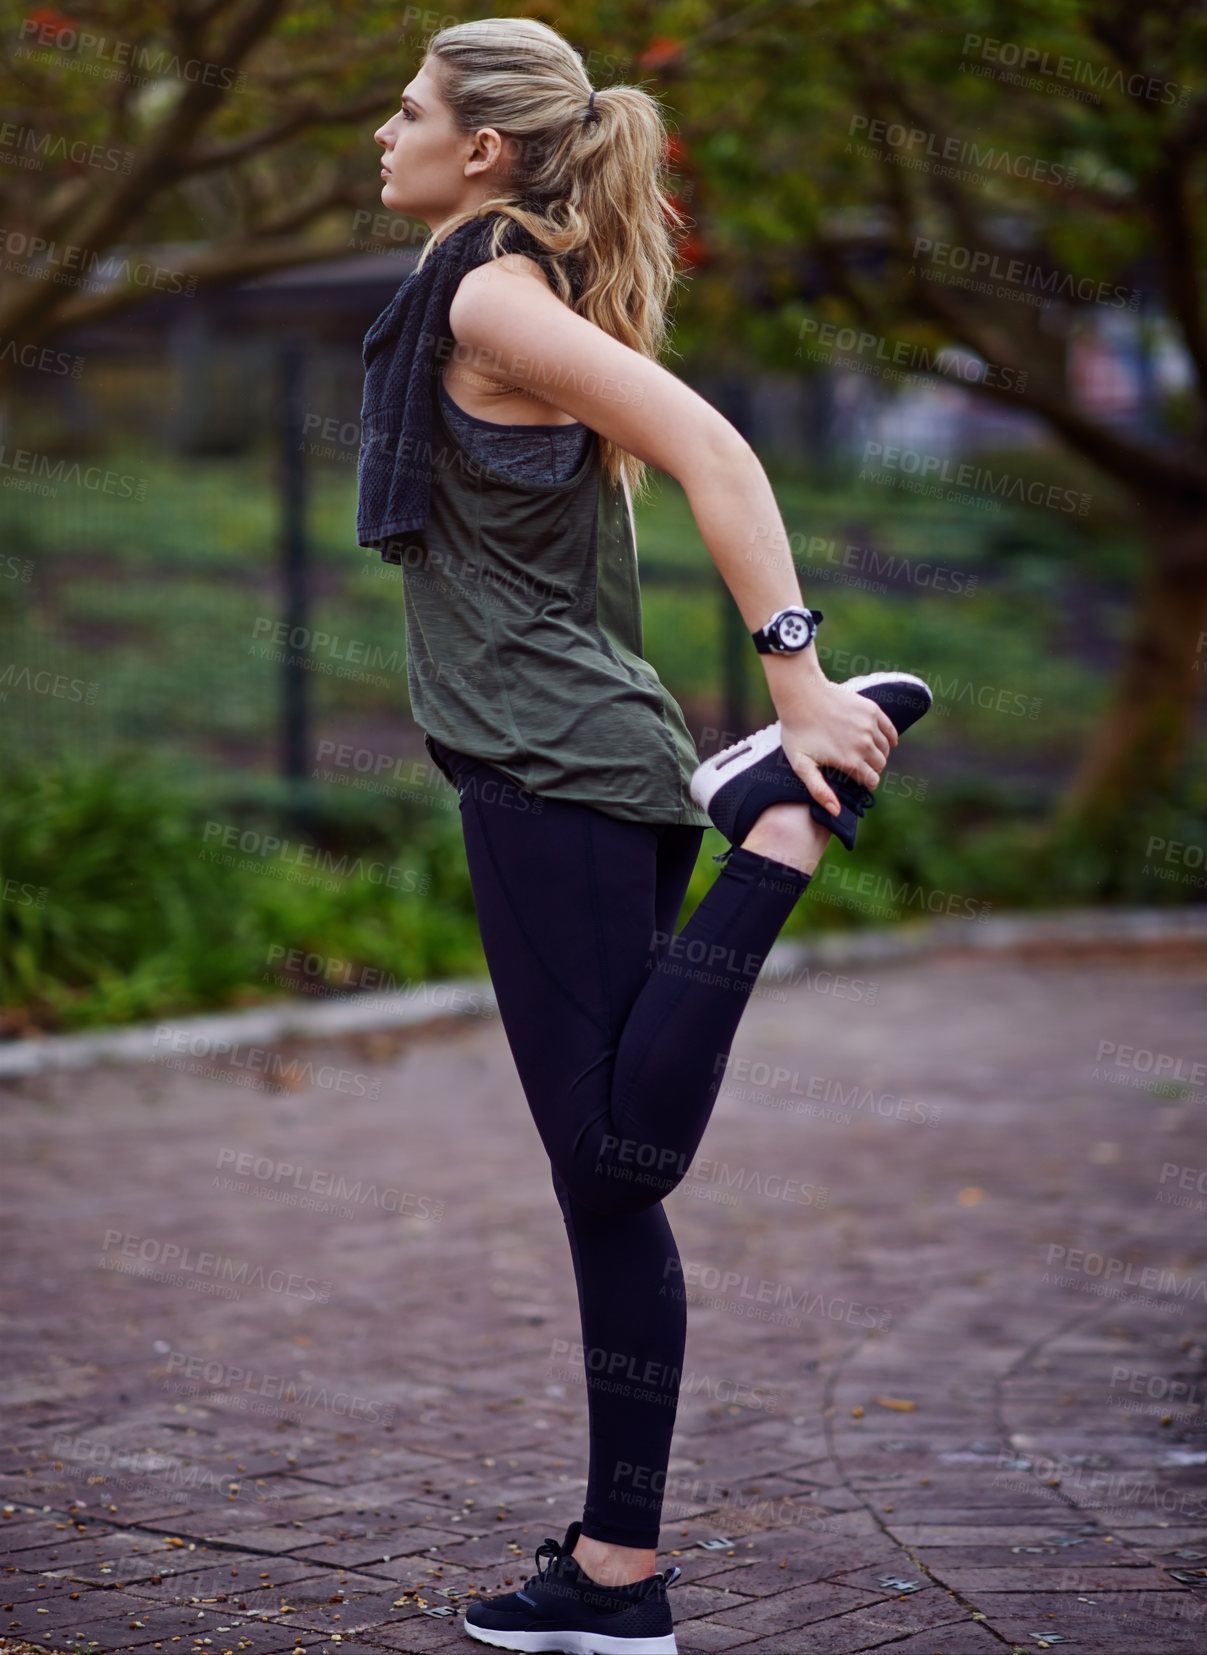 Buy stock photo Shot of a young woman stretching her legs before a run